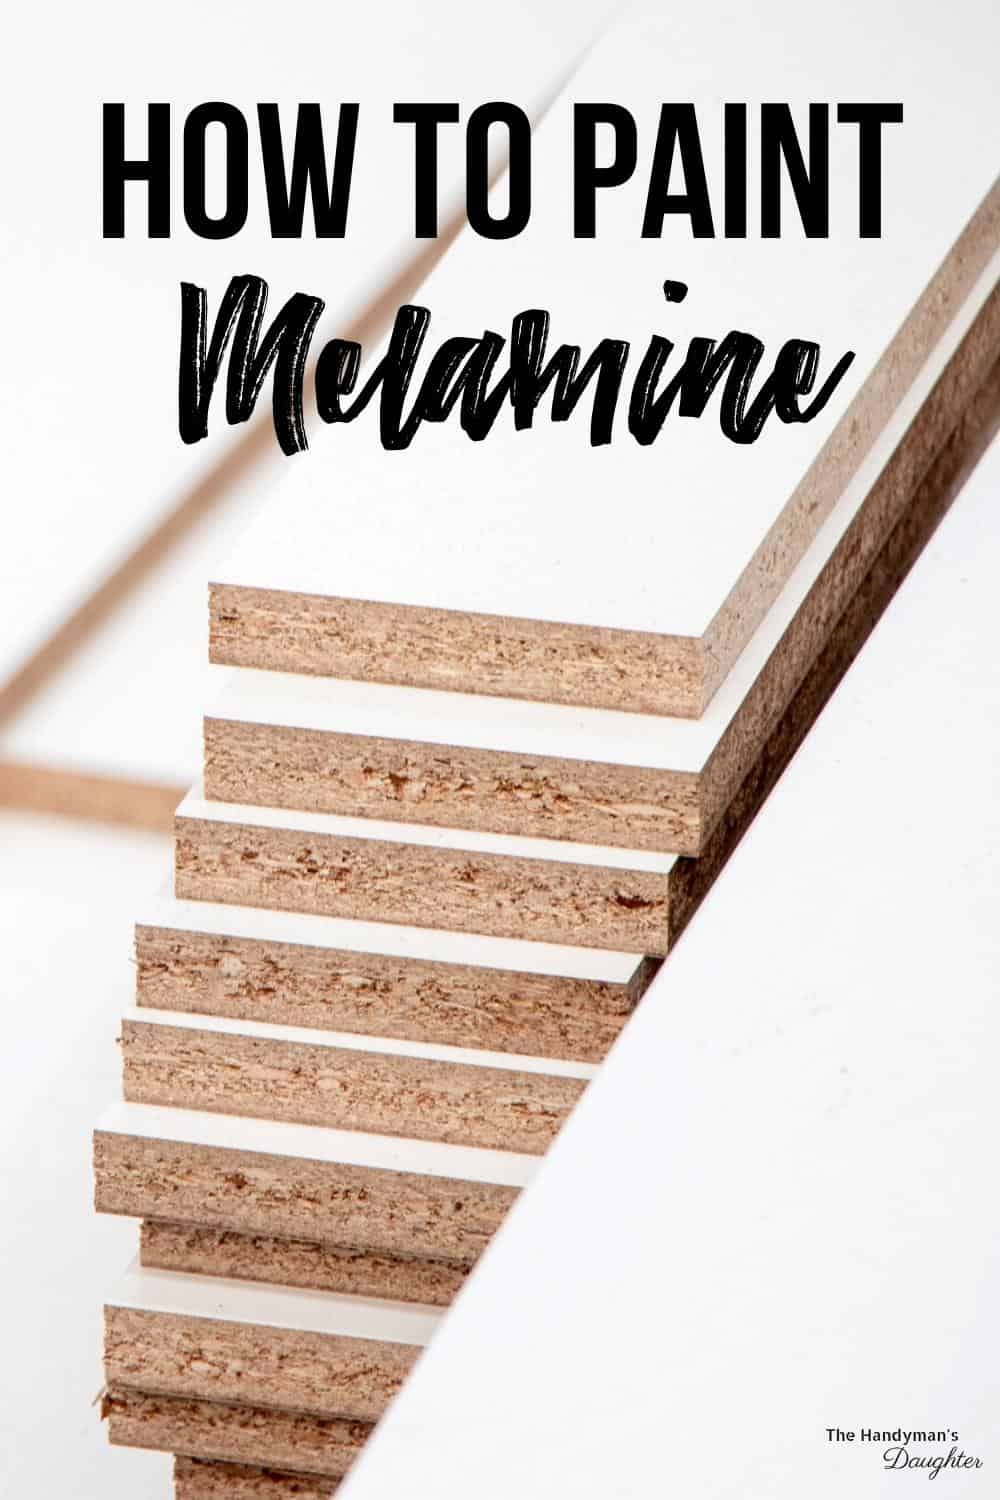 melamine boards with text overlay reading "how to paint melamine"